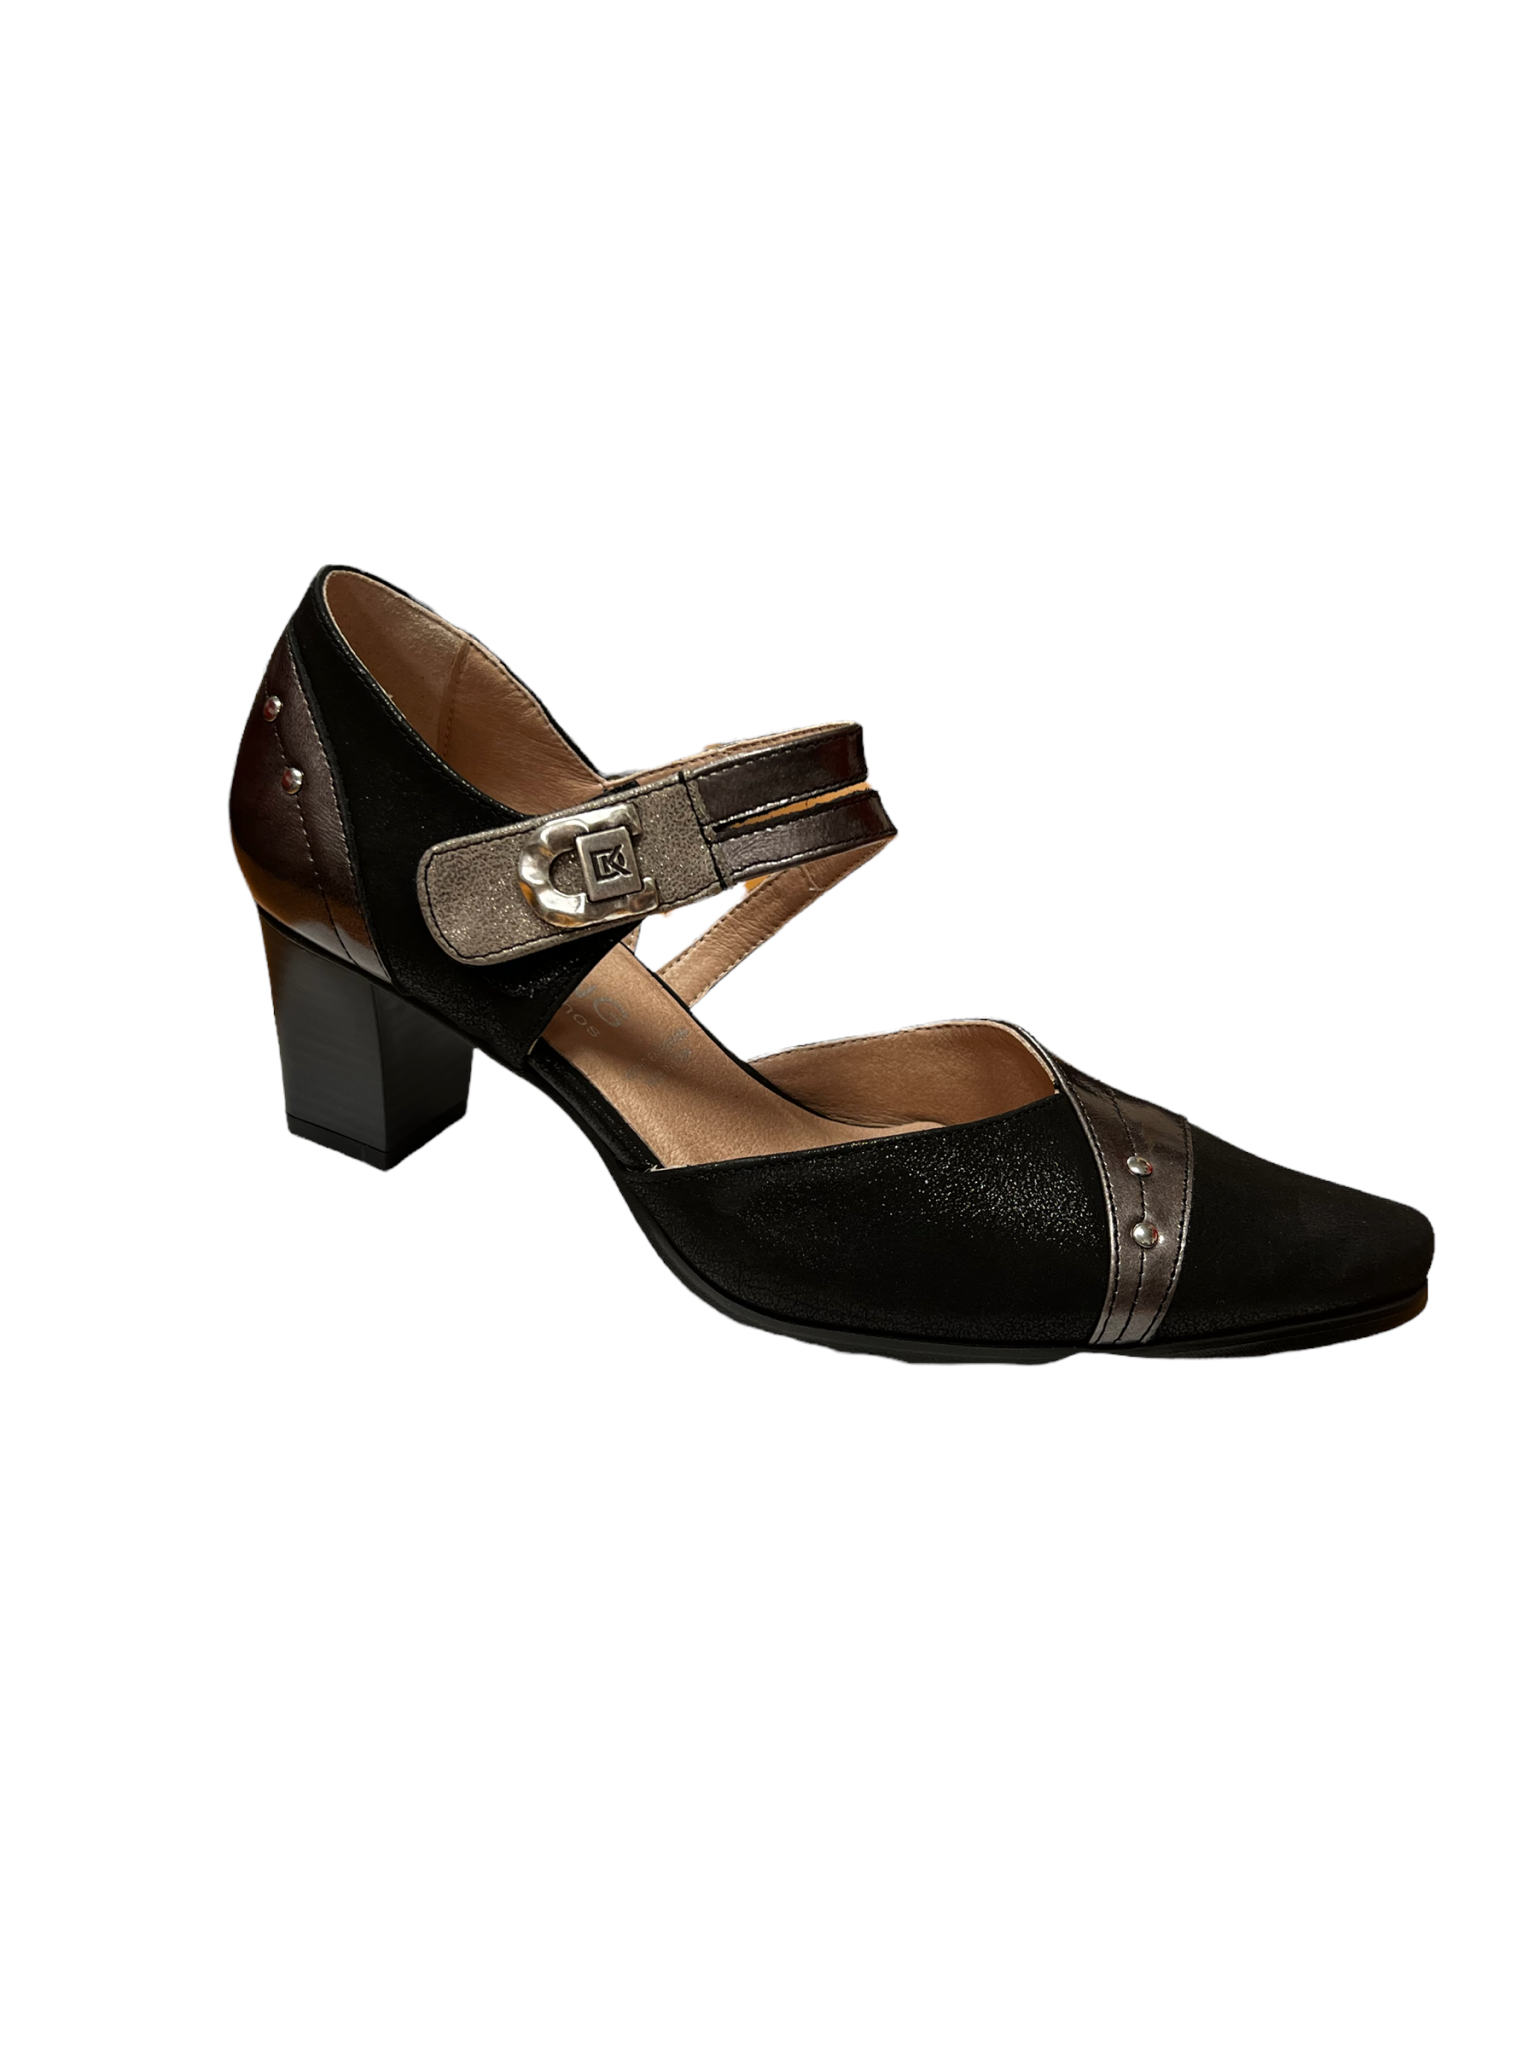 Black Mary Jane with Higher Heel and Contrast Panels